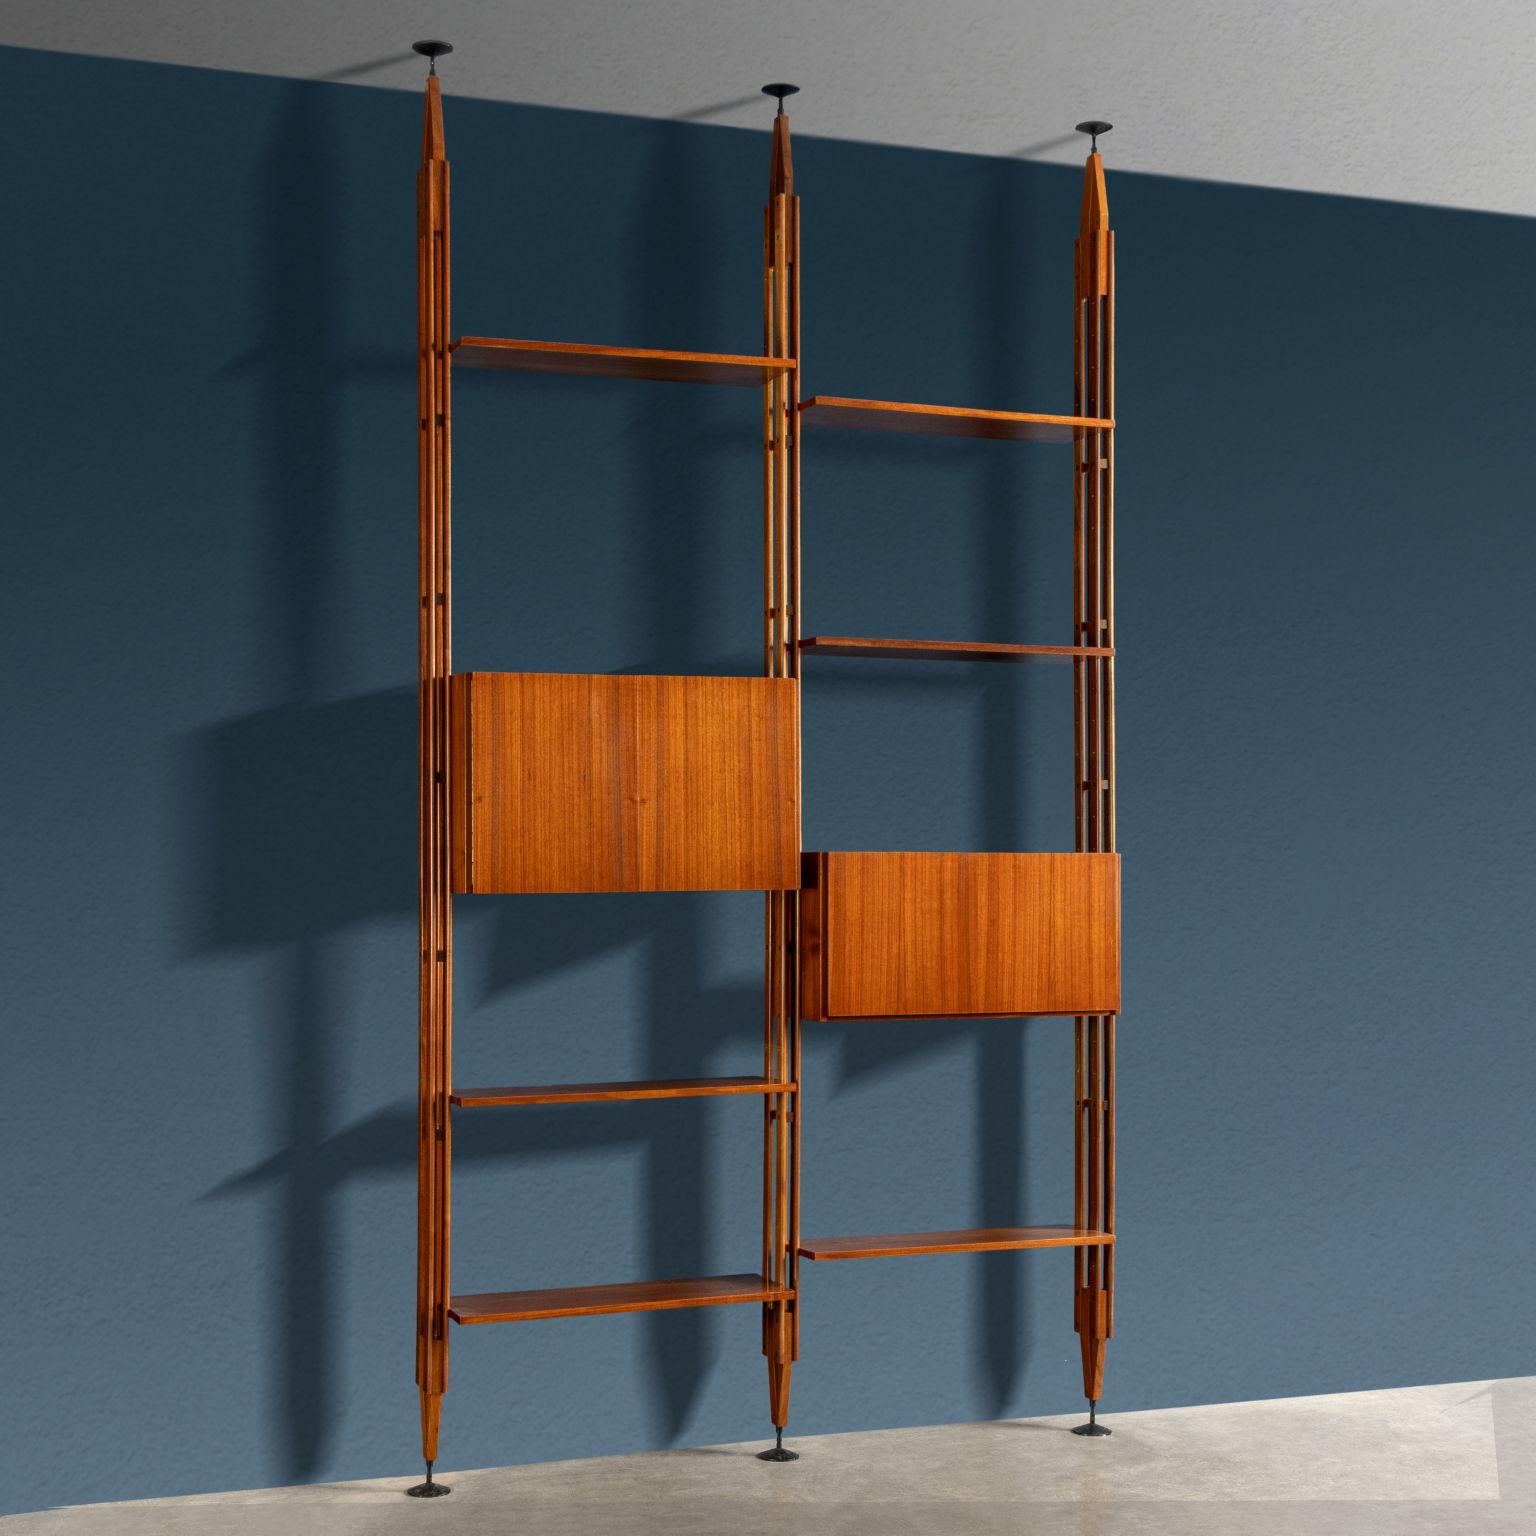 Iconic ceiling bookcase, also usable from the center, model 'LB7', designed by Franco Albini and produced by Poggi from the late 1950s.
The bookcase features two bays with solid teak wood uprights pressure-fixed between the ceiling and floor,